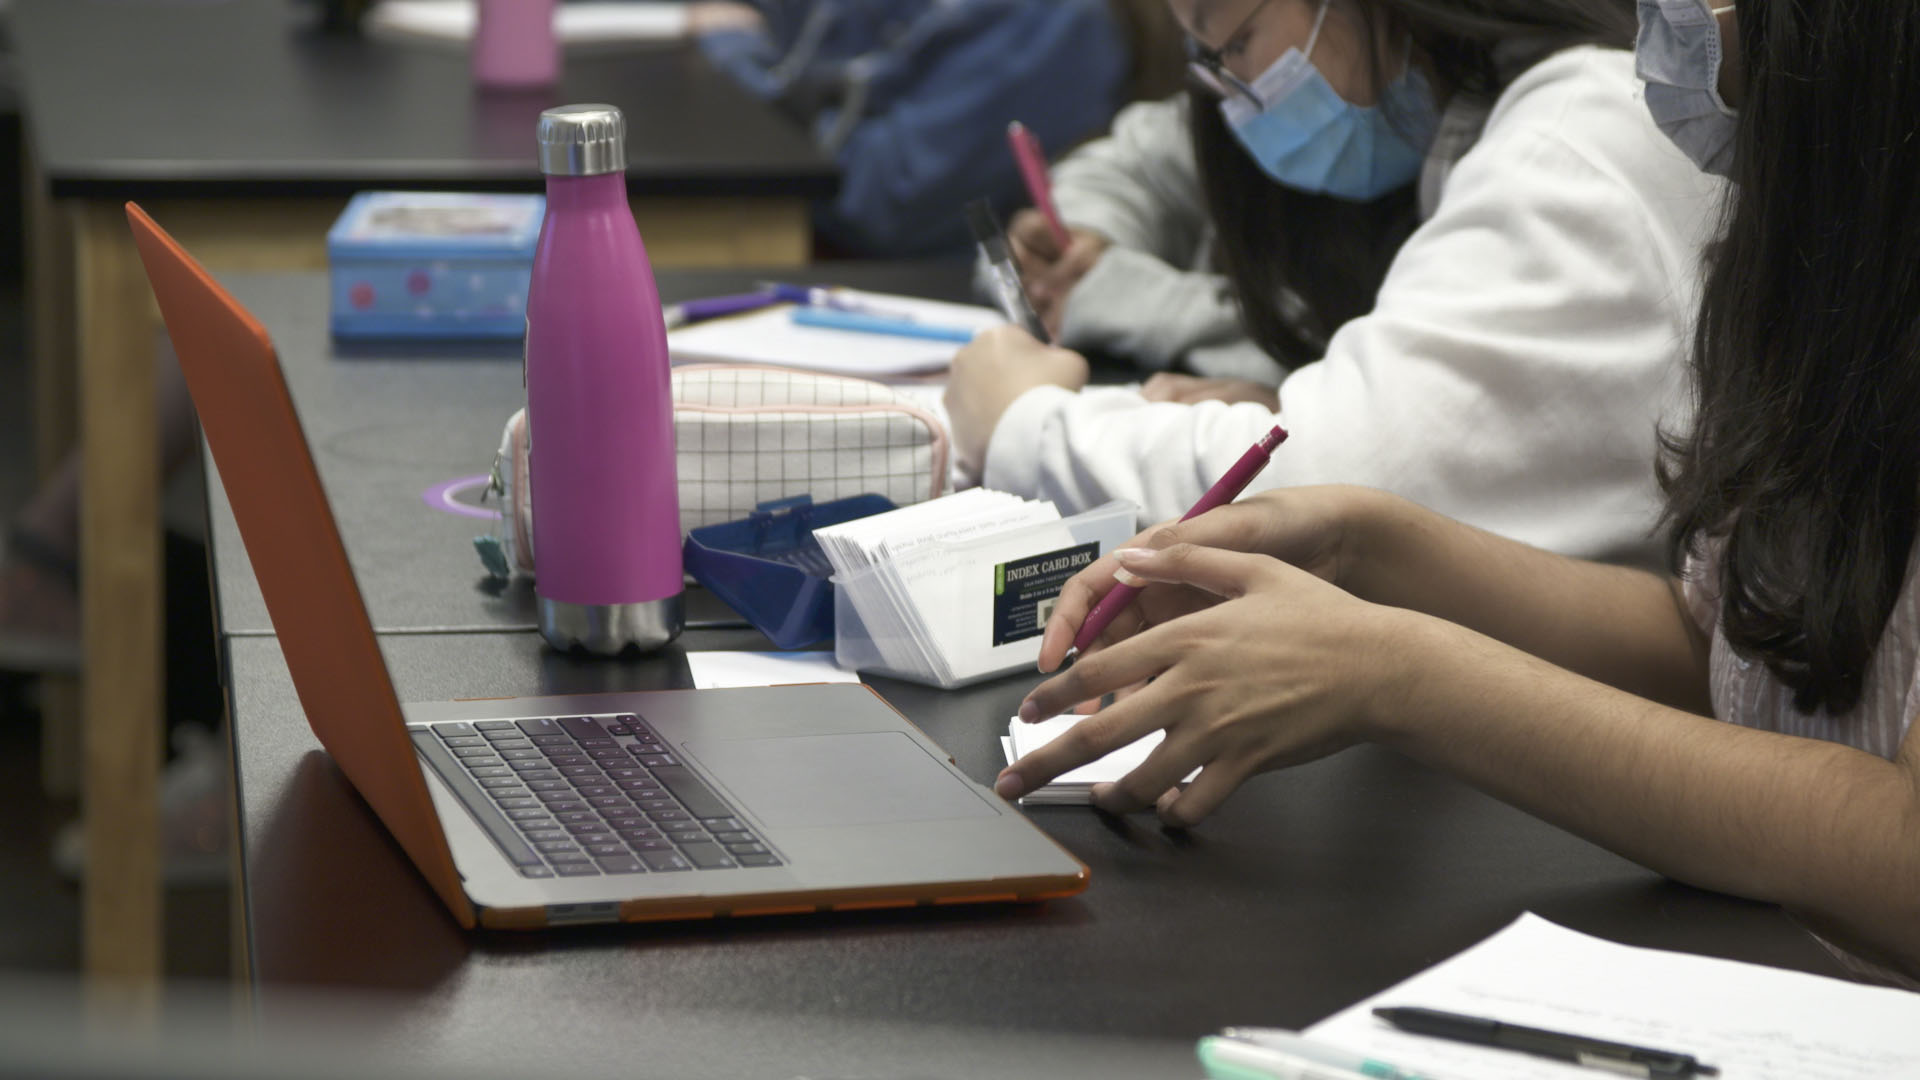 Southern Arizona students head back to class with COVID-19 infections rising